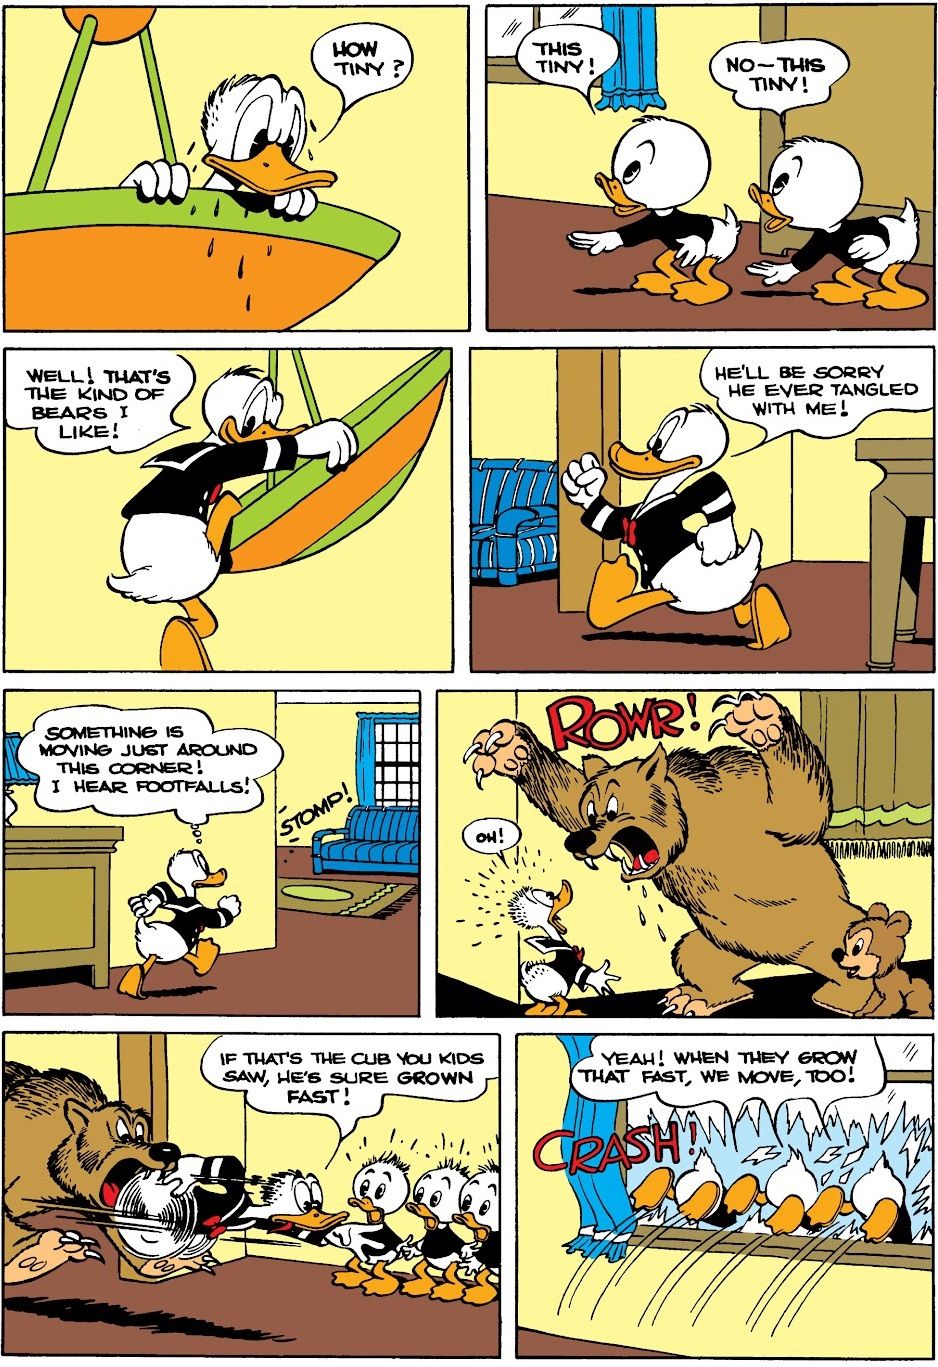 Donald Duck faces off against a mama bear